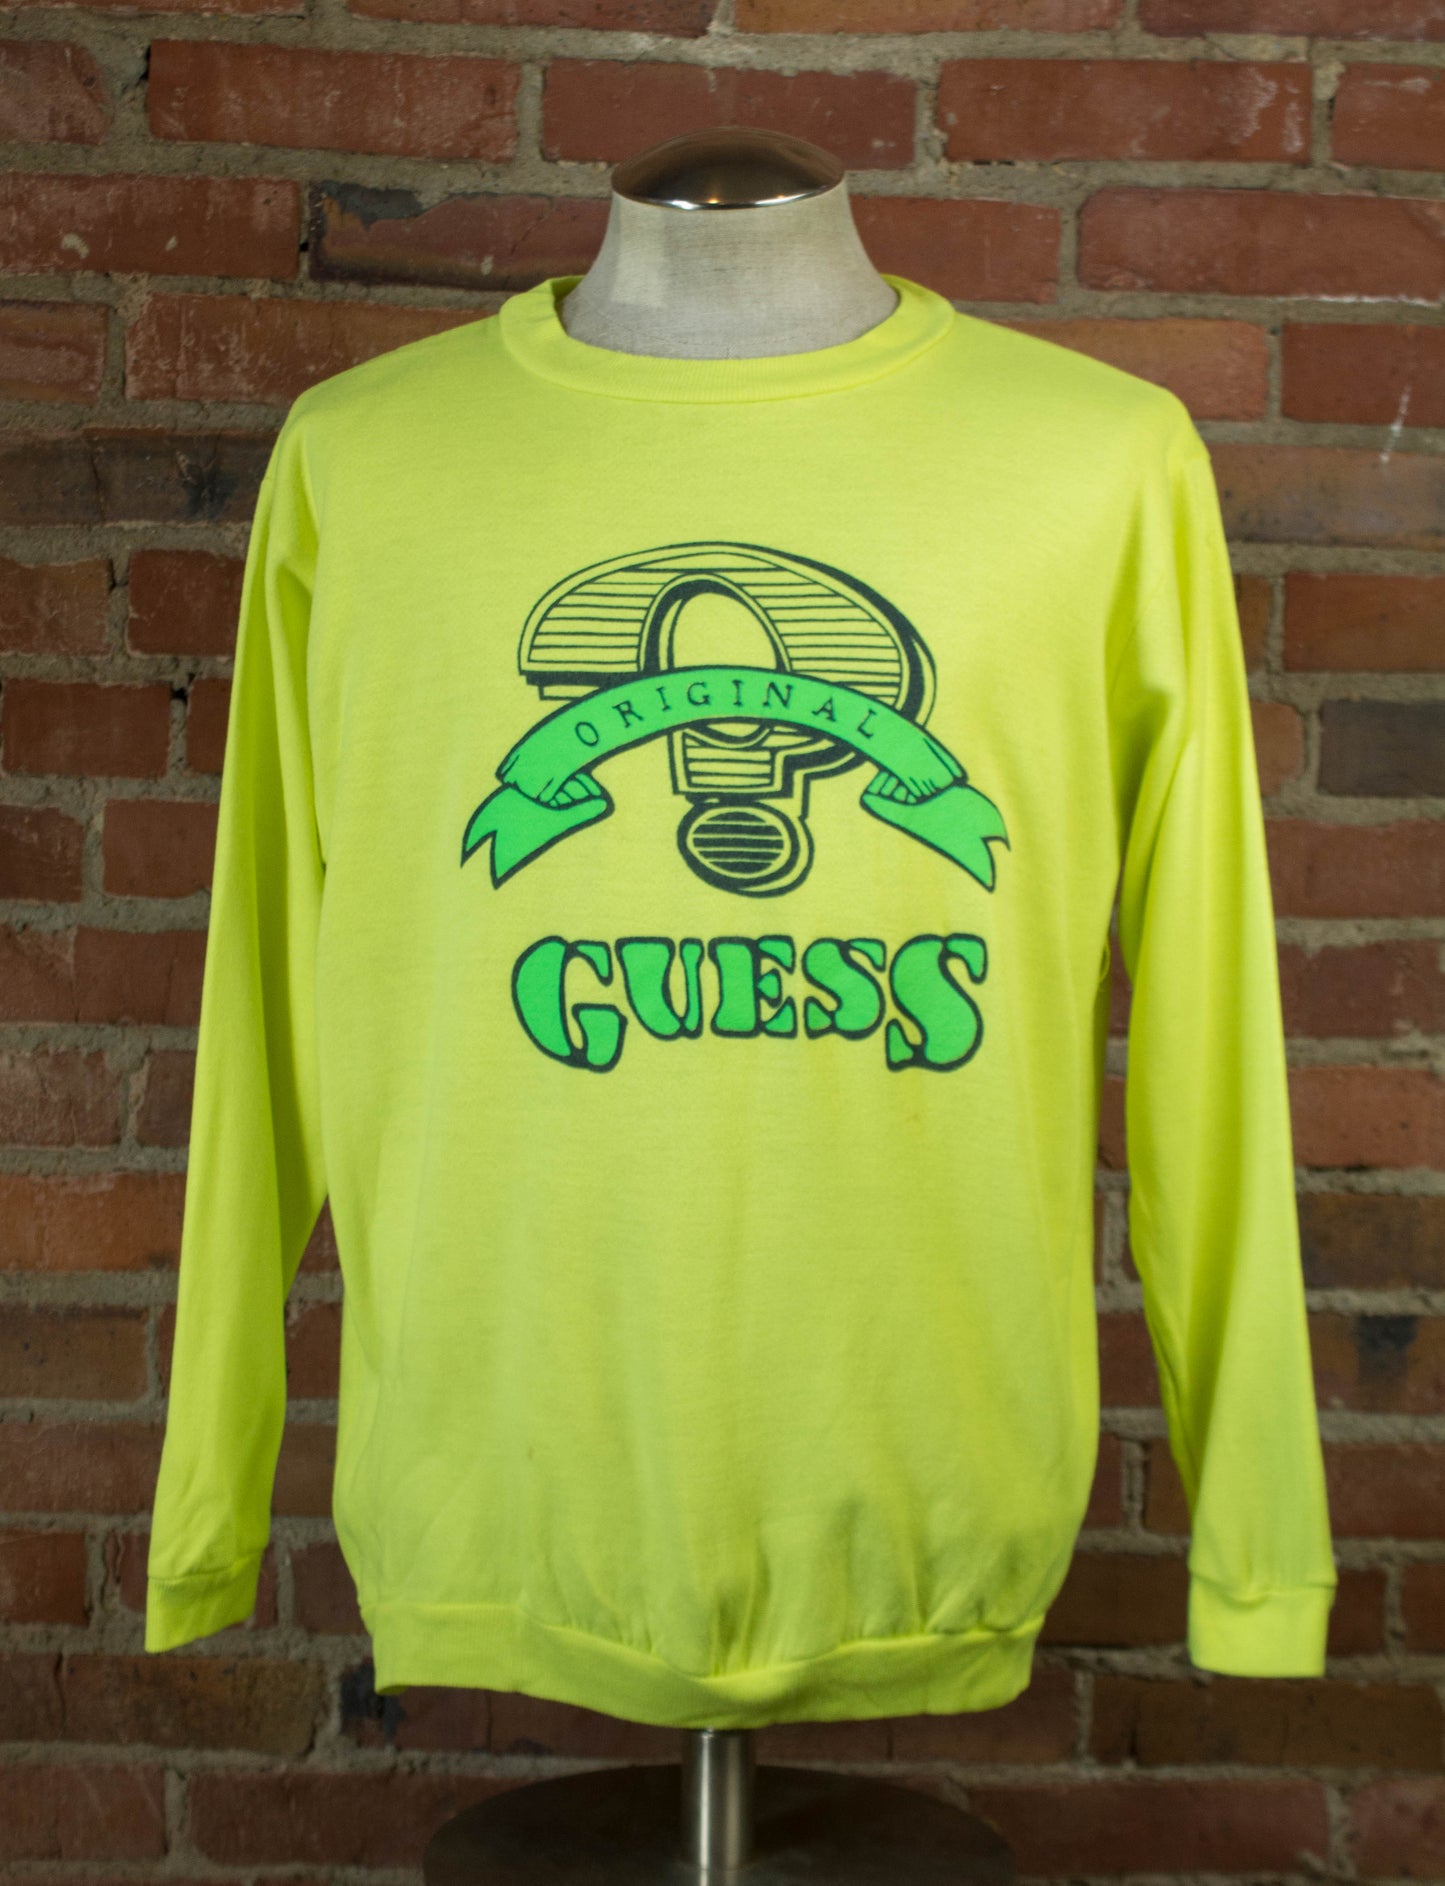 Vintage 80s Guess Neon Yellow Sweatshirt With Neon Green Puffy Print Graphic Unisex  XL